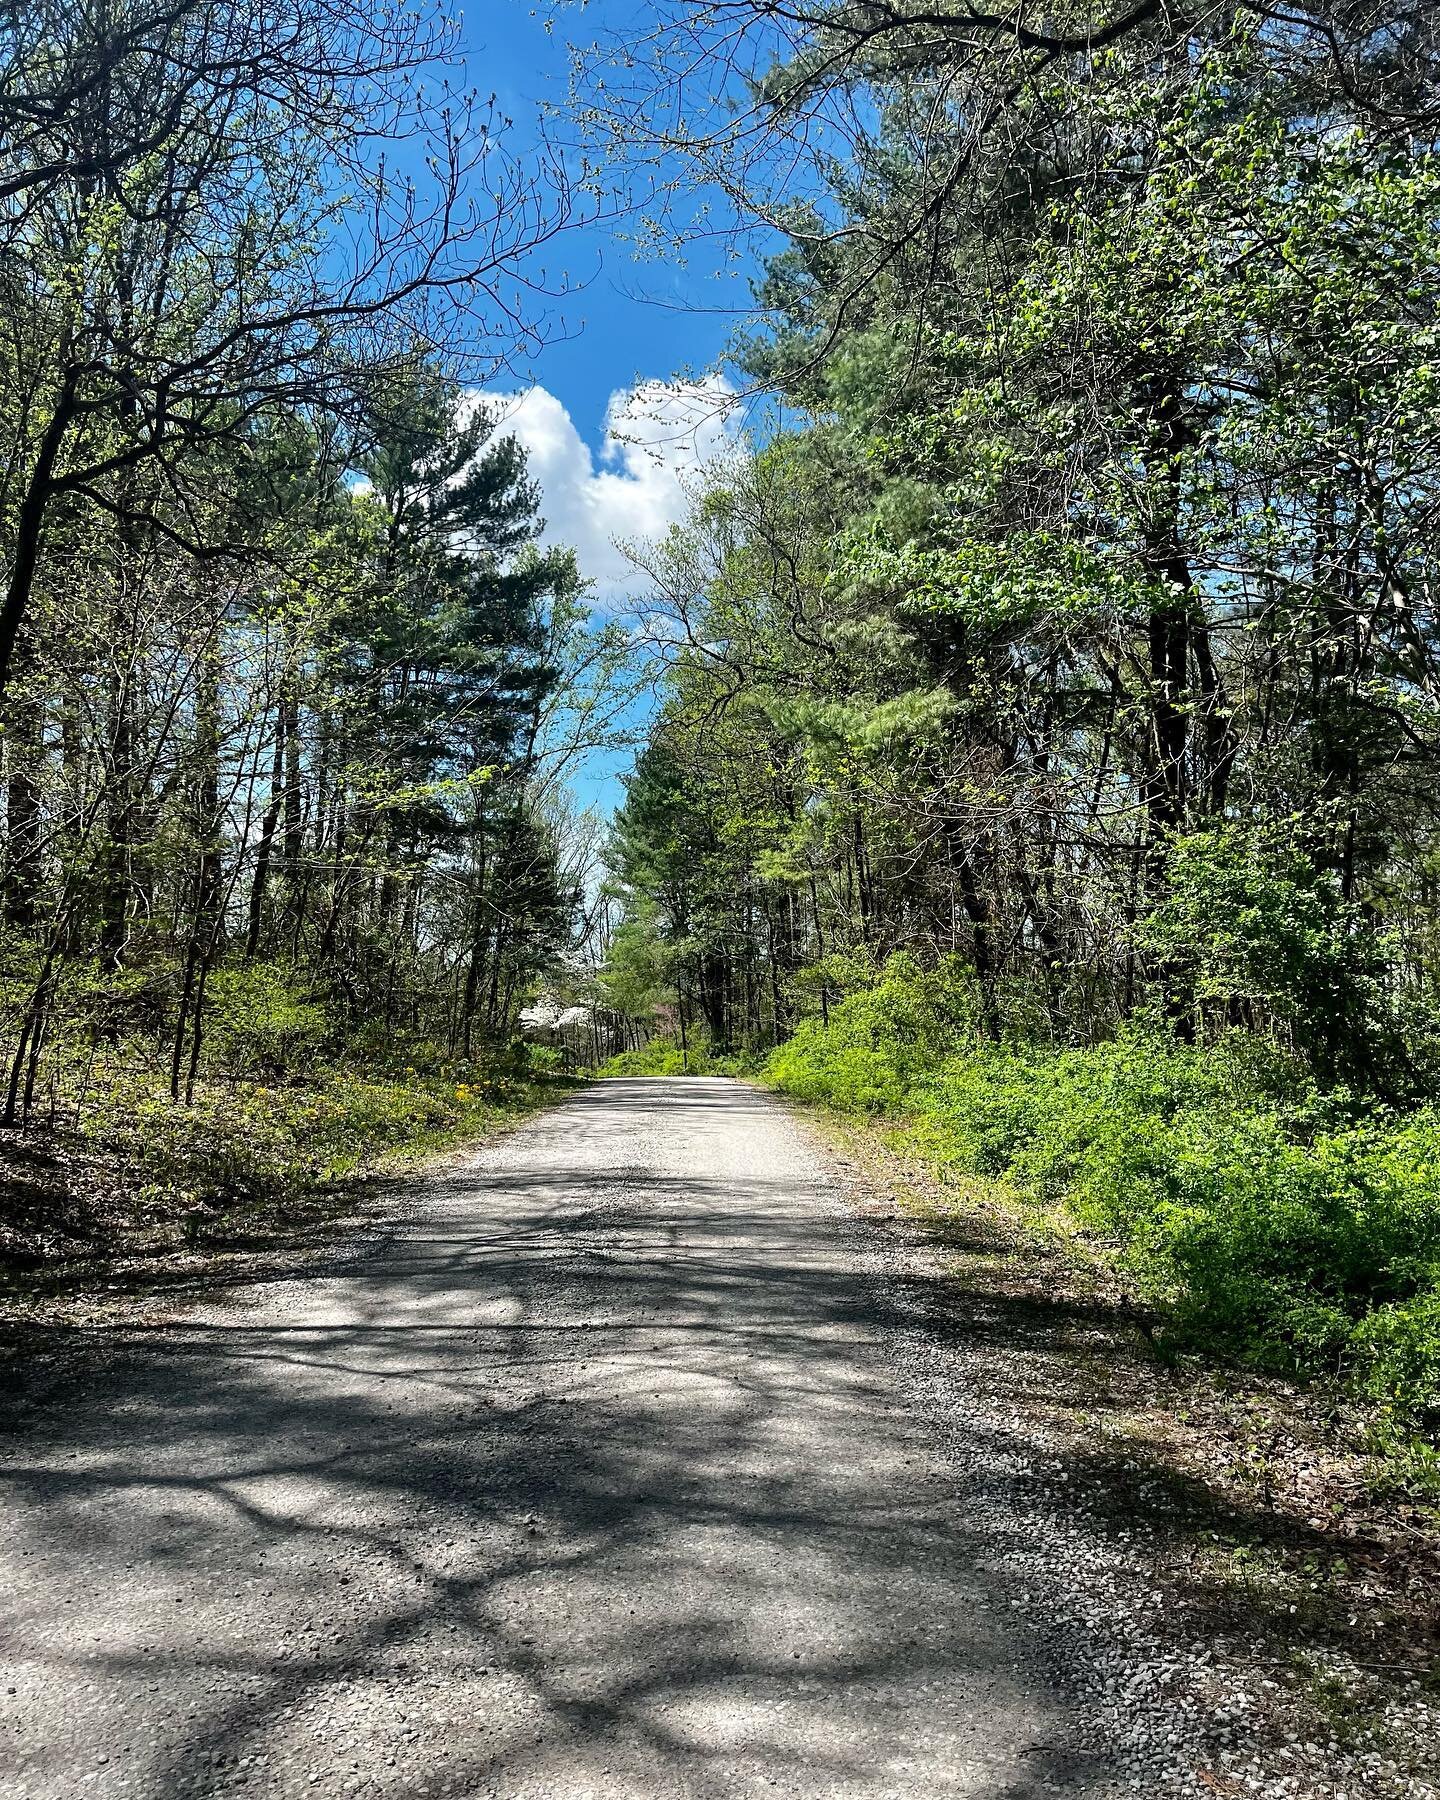 Received a foliage report of Hoosier National Forest from @emmypenta and it&rsquo;s looking like prime springtime! Who&rsquo;s up for more gravel these upcoming weeks?